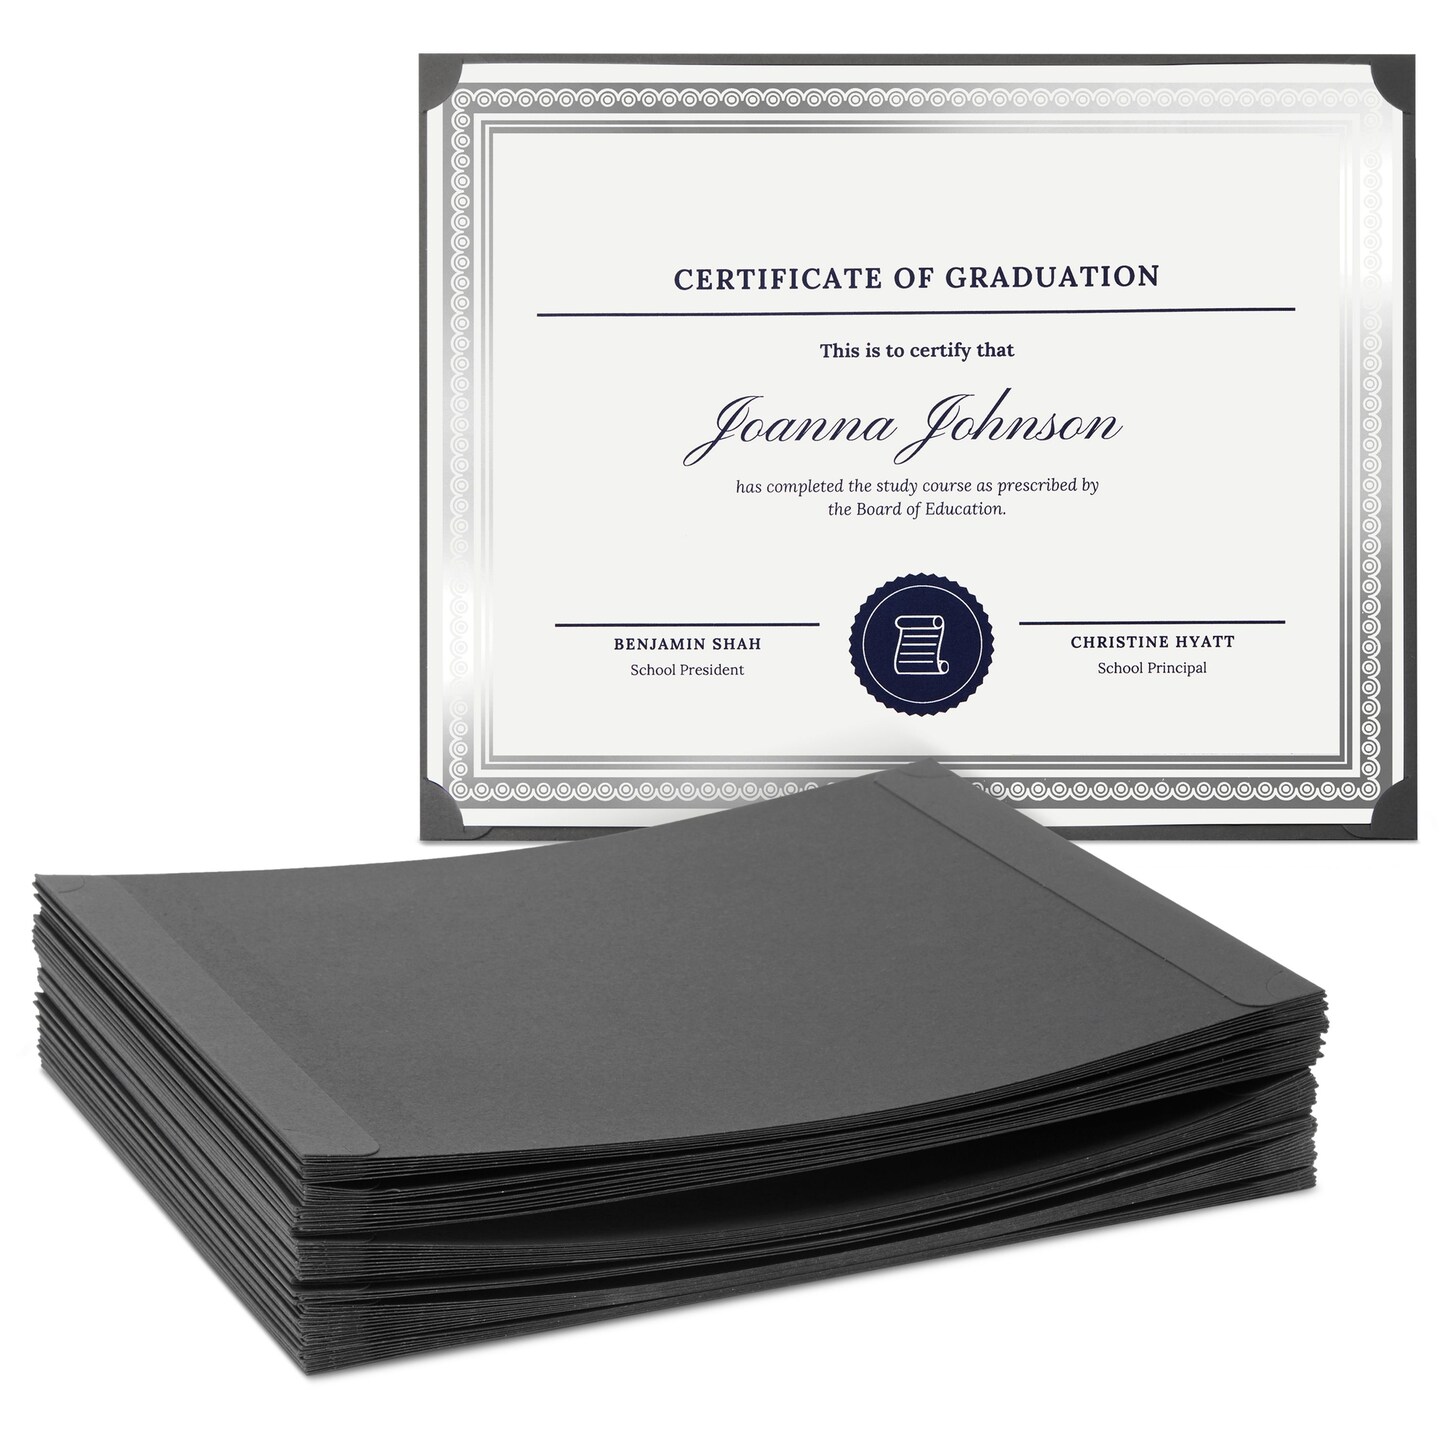 48-Pack Single Sided Award Certificate Holders - Bulk Certificate Holders for Graduation, Diploma, Employee Appreciation, Certification (fits 8.5x11, Black)